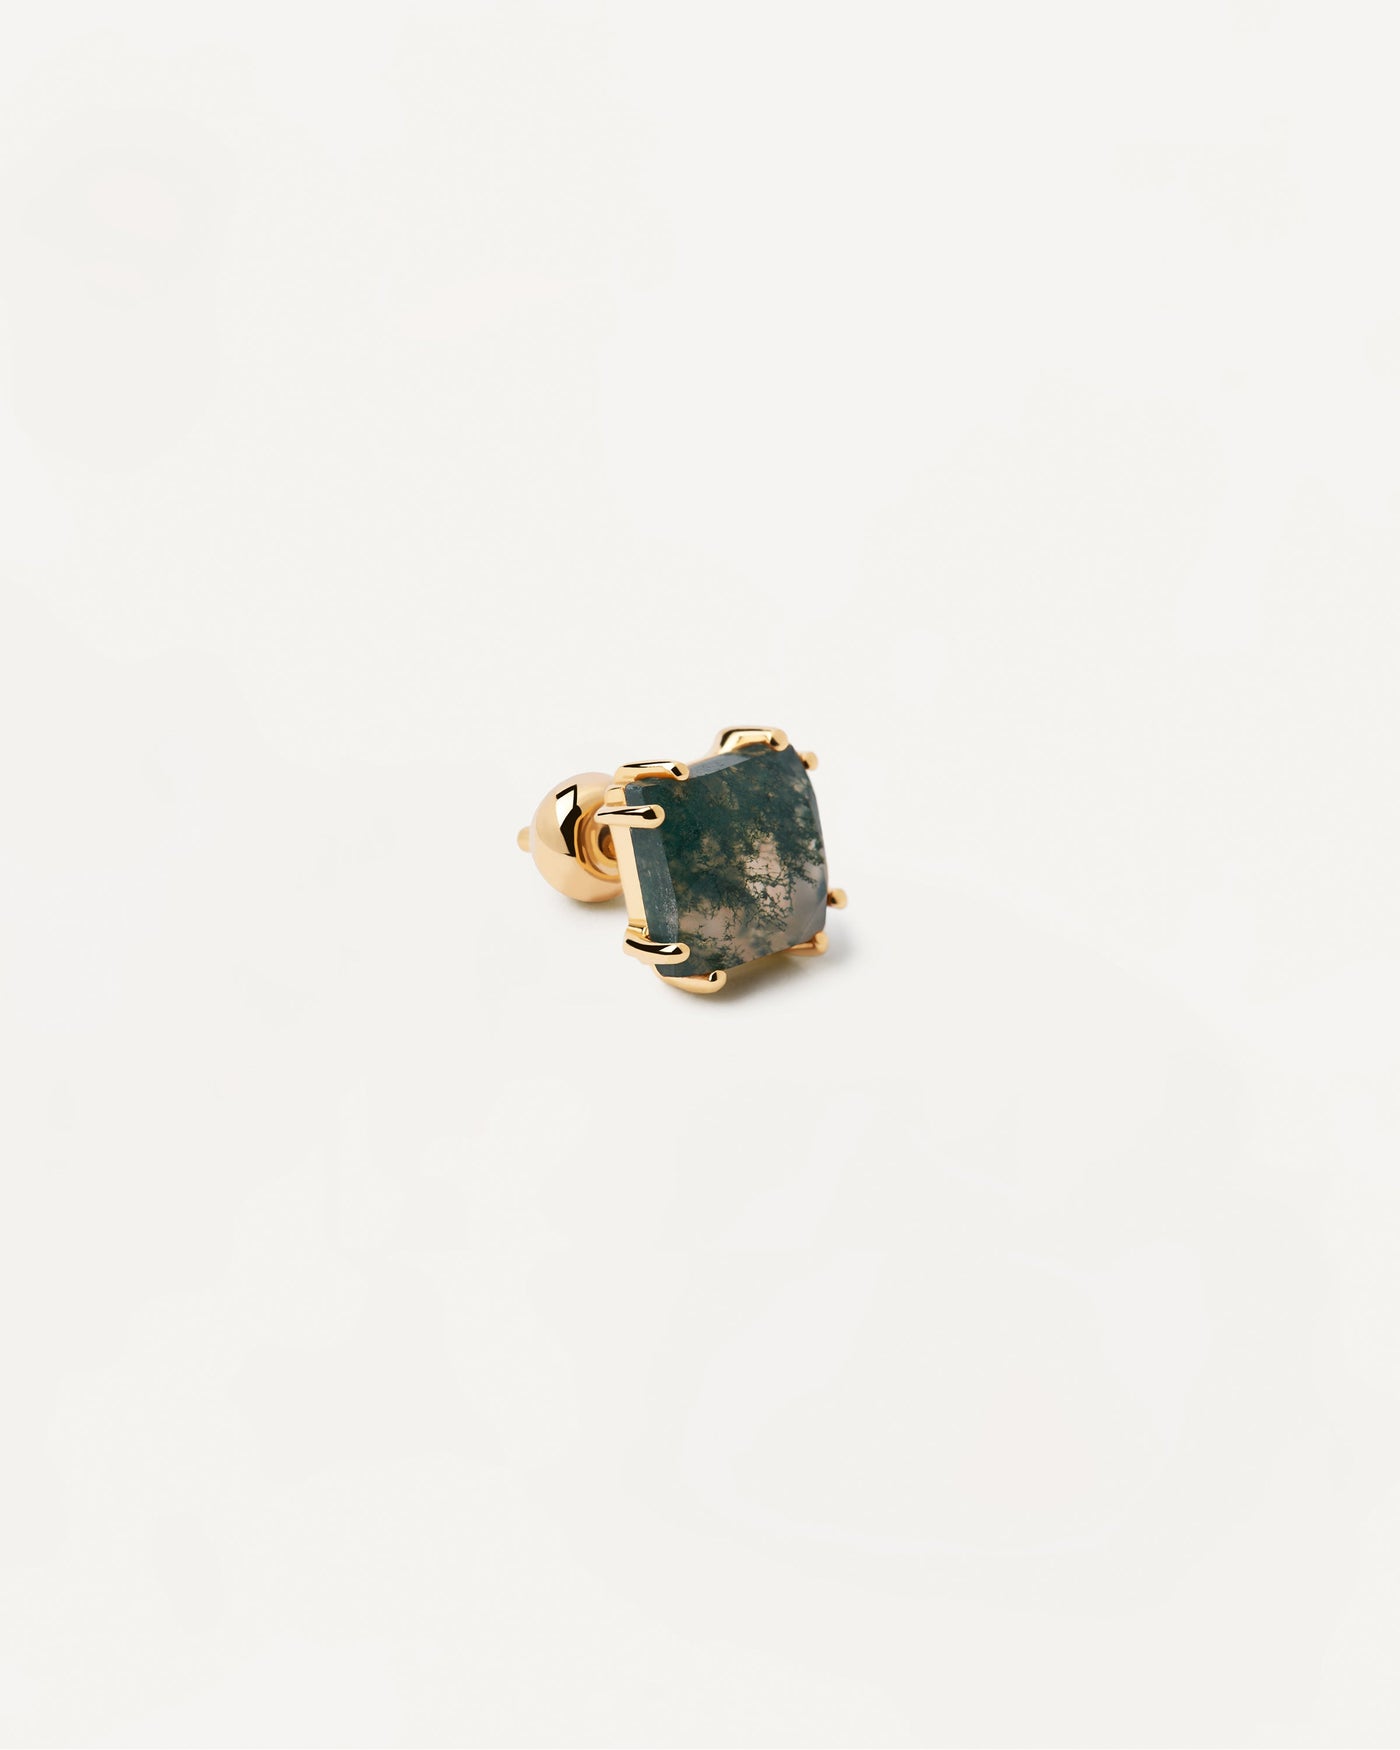 2023 Selection | Suki Moss Agate Single Earring. Gold-plated stud ear piercing with dark green gemstone in Asscher cut. Get the latest arrival from PDPAOLA. Place your order safely and get this Best Seller. Free Shipping.